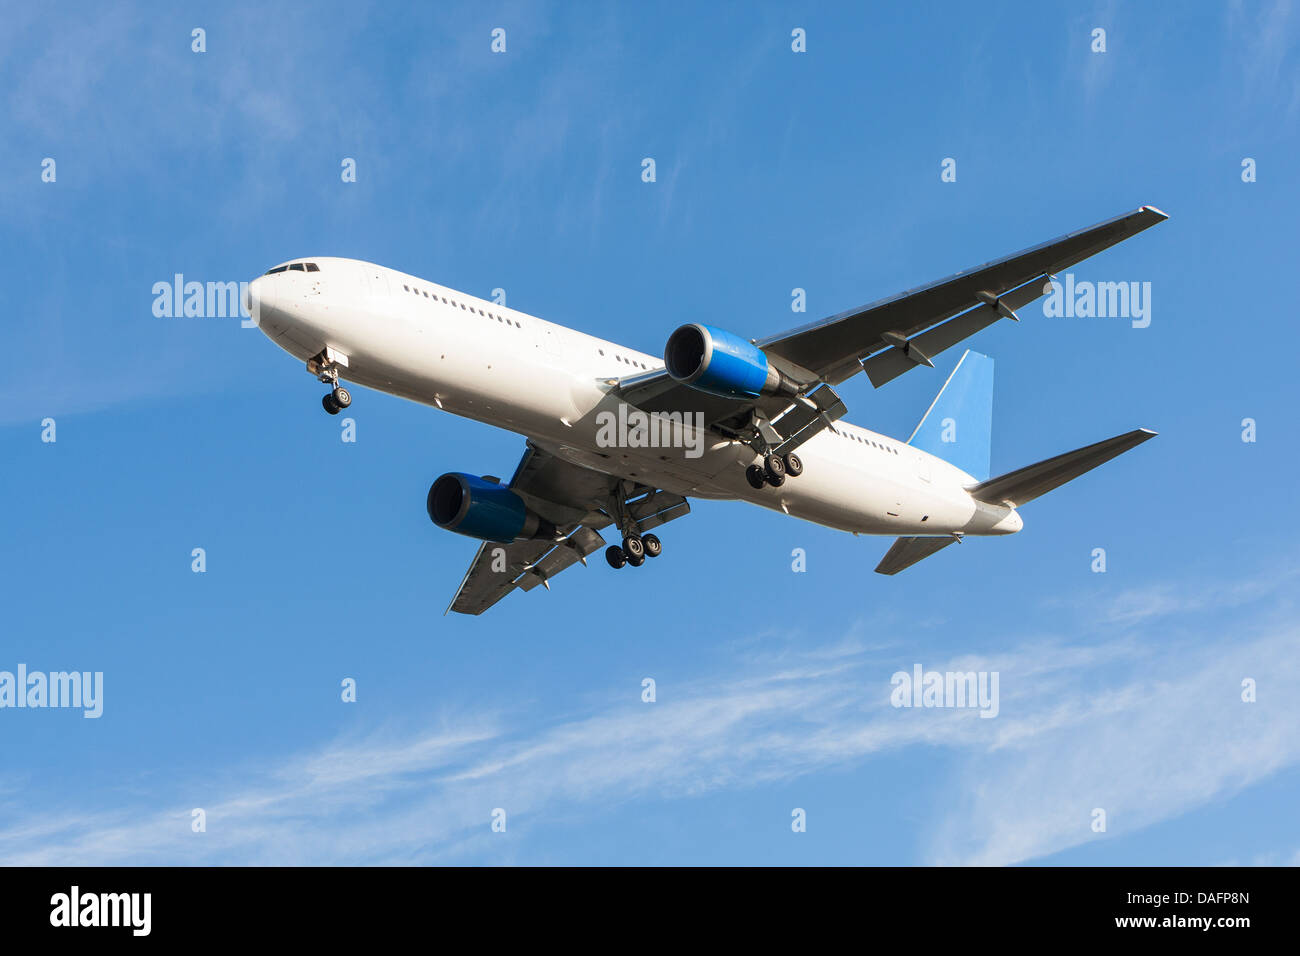 A generic airline airplane landing with undercarriage wheels and flaps down Stock Photo